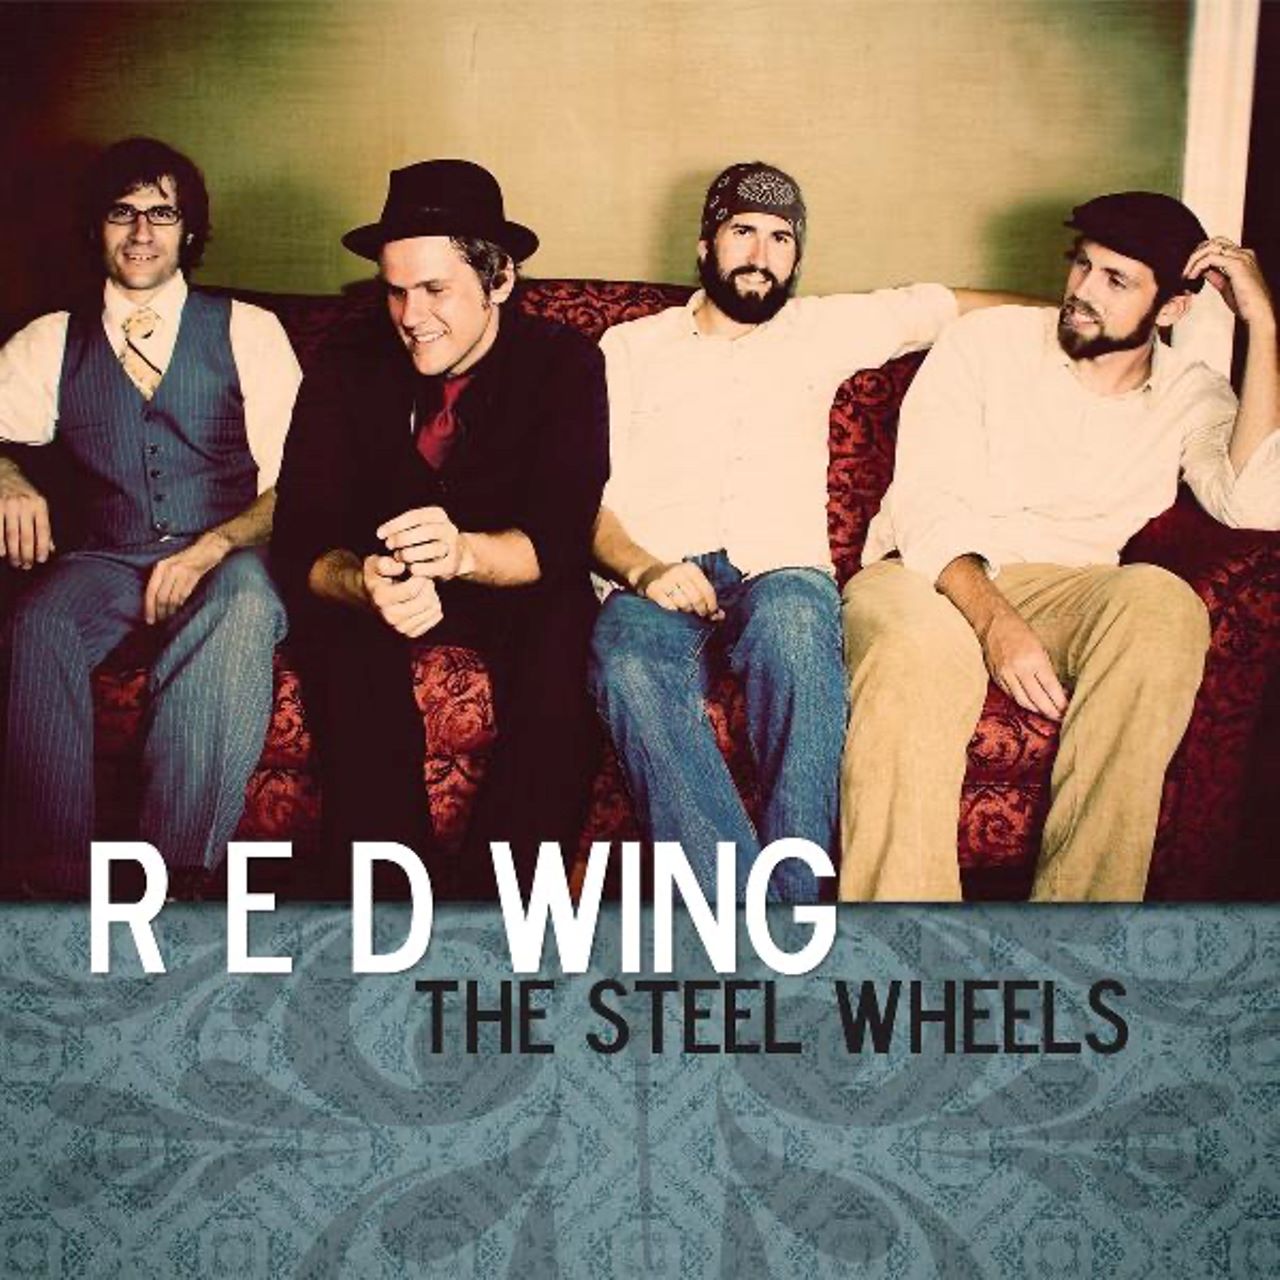 Steel Wheels - Red Wing cover album